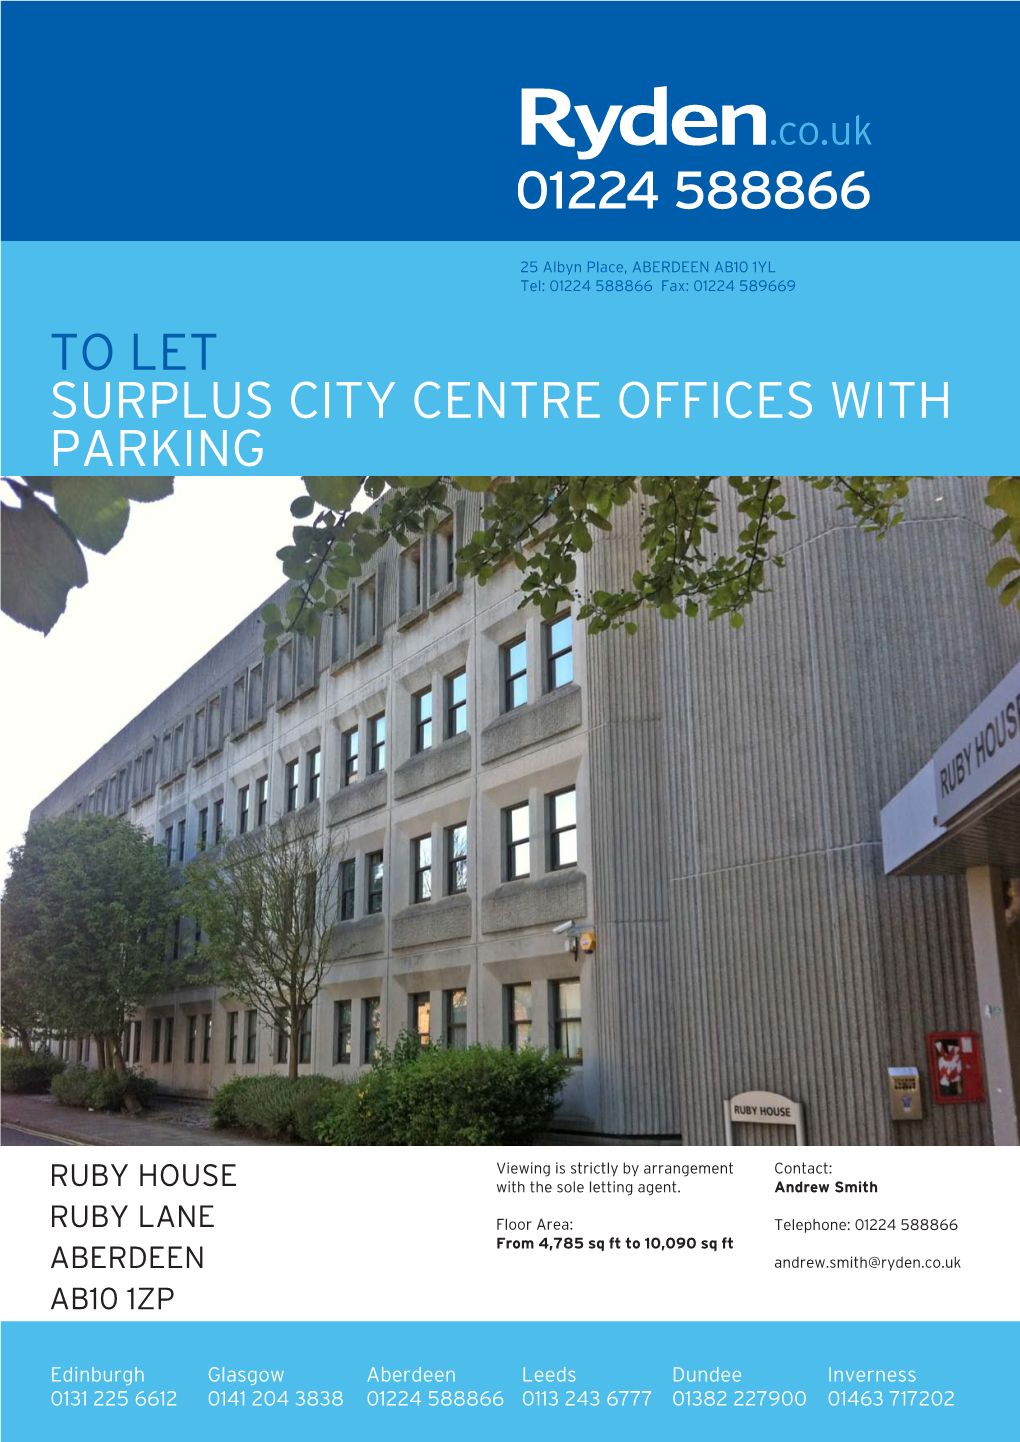 To Let Surplus City Centre Offices with Parking